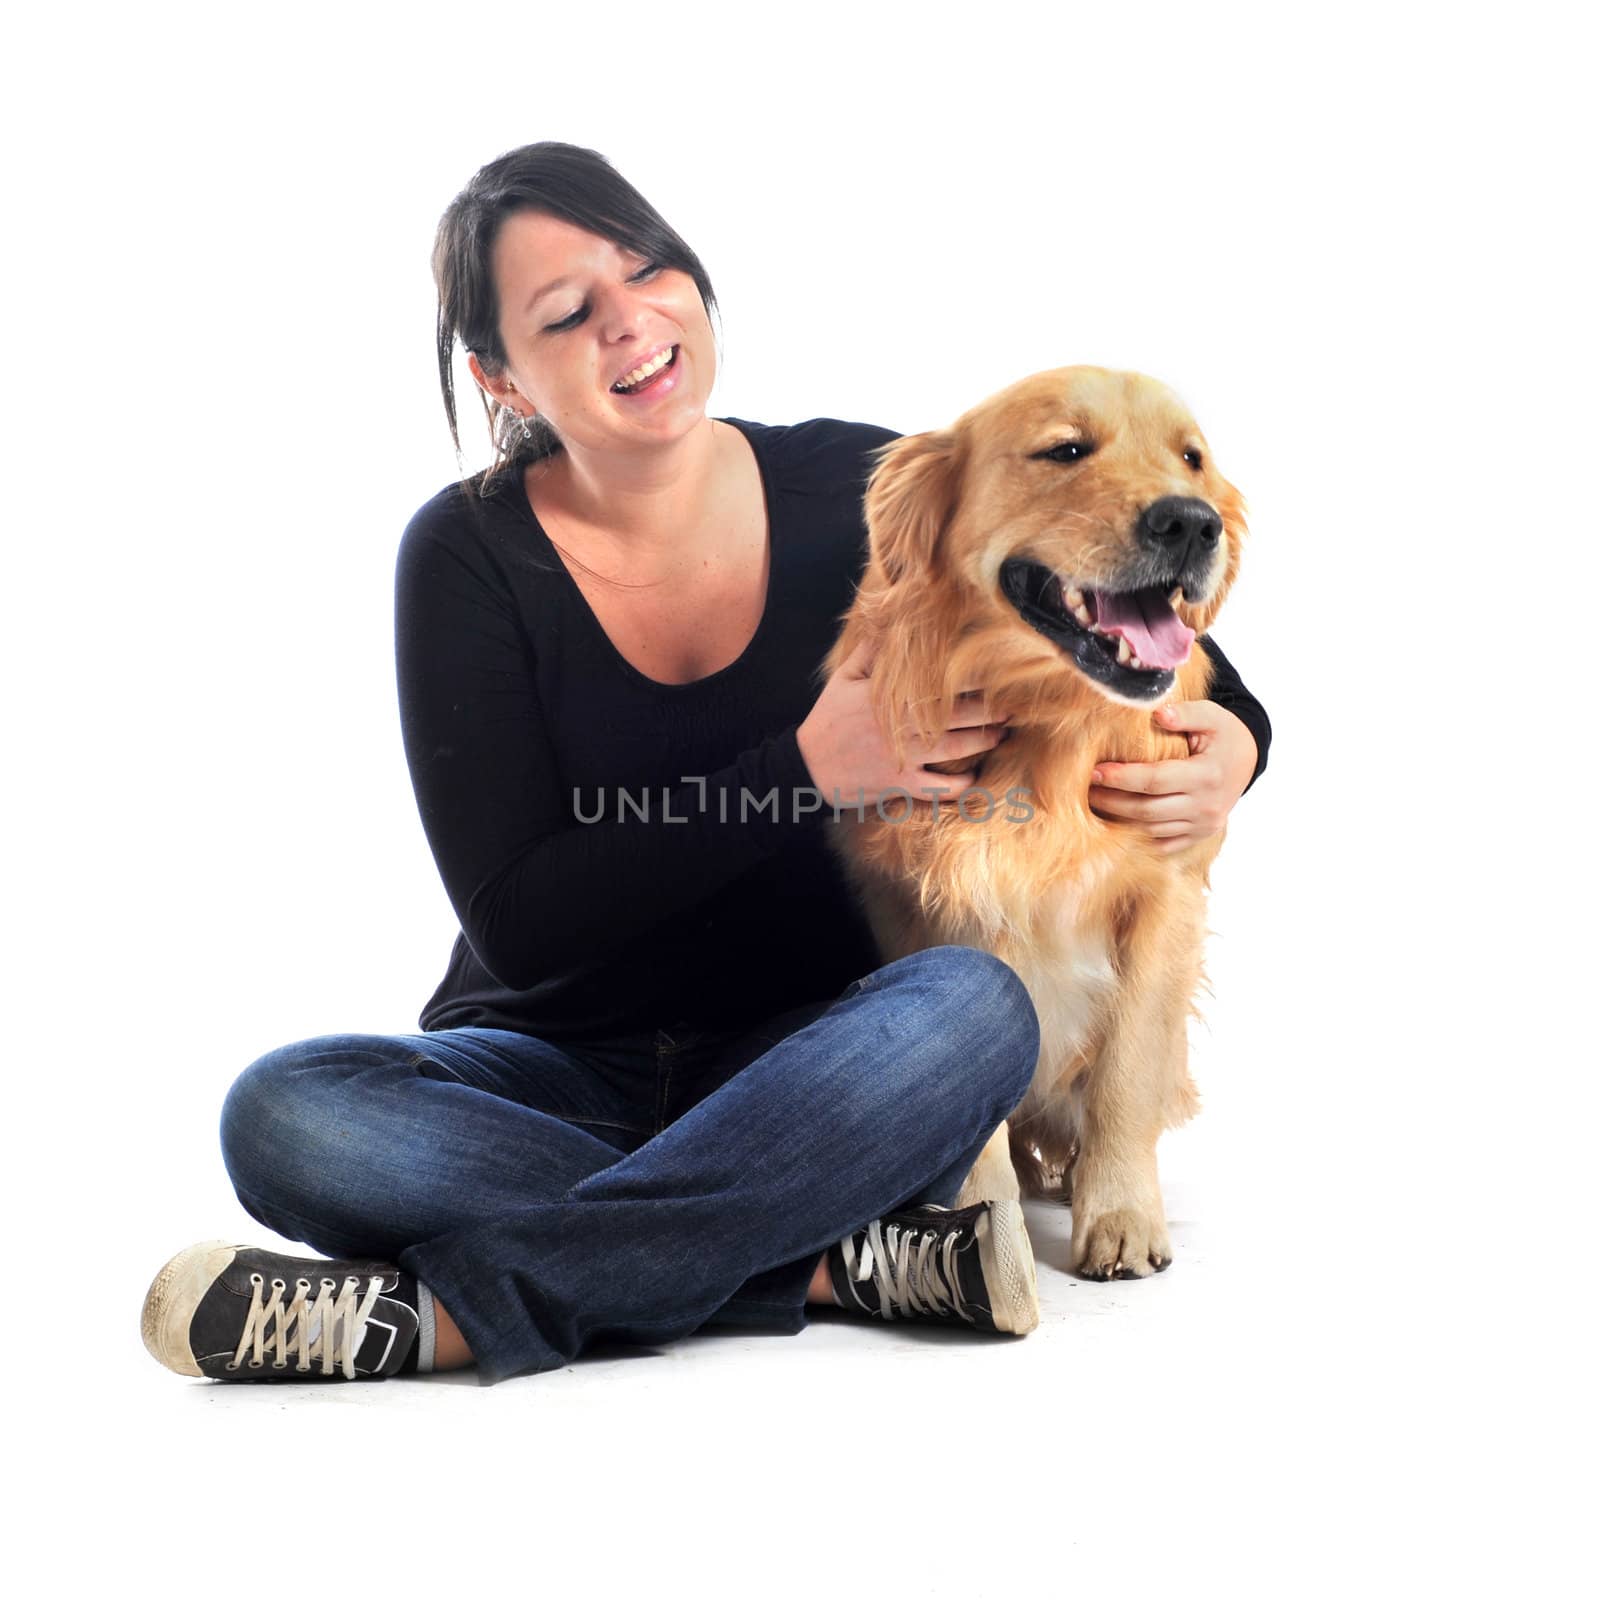 golden retriever and woman by cynoclub